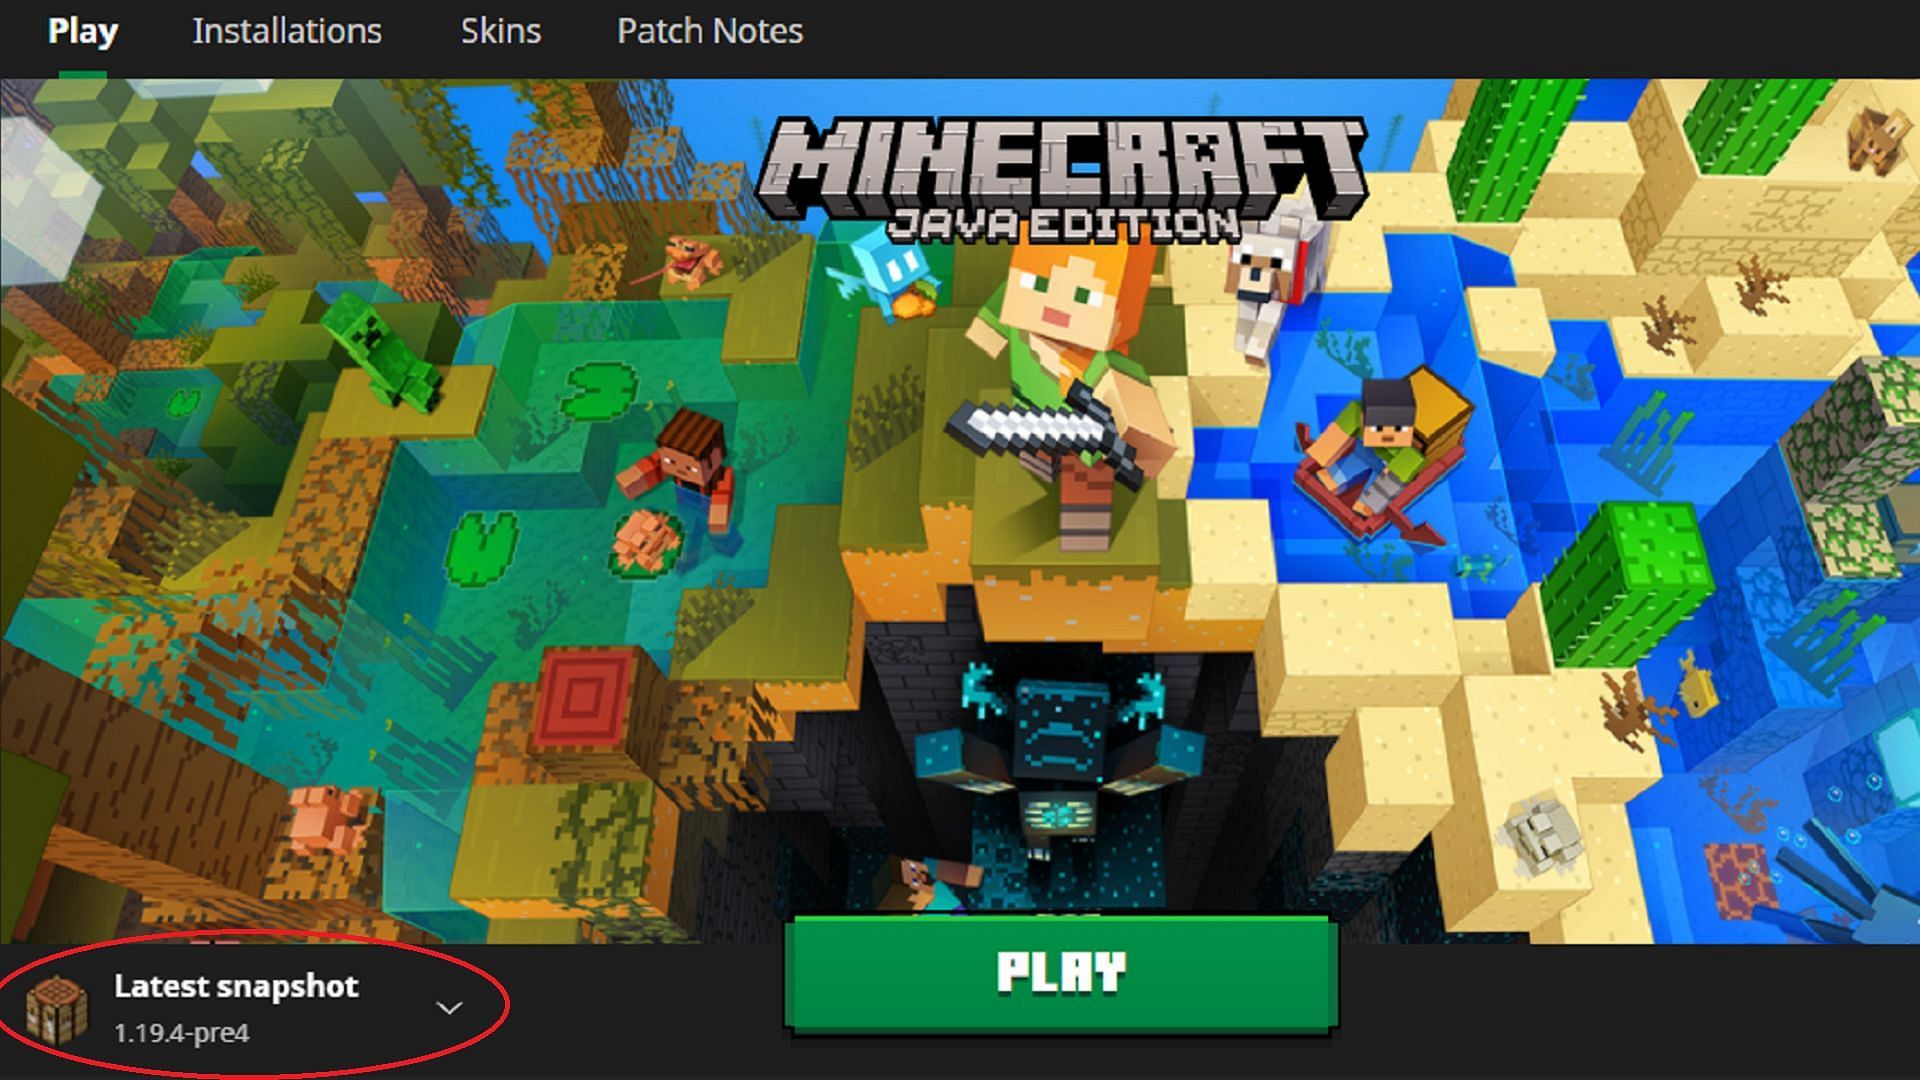 PC players can access Minecraft Java&#039;s latest snapshot in just a few clicks via the game launcher (Image via Mojang)